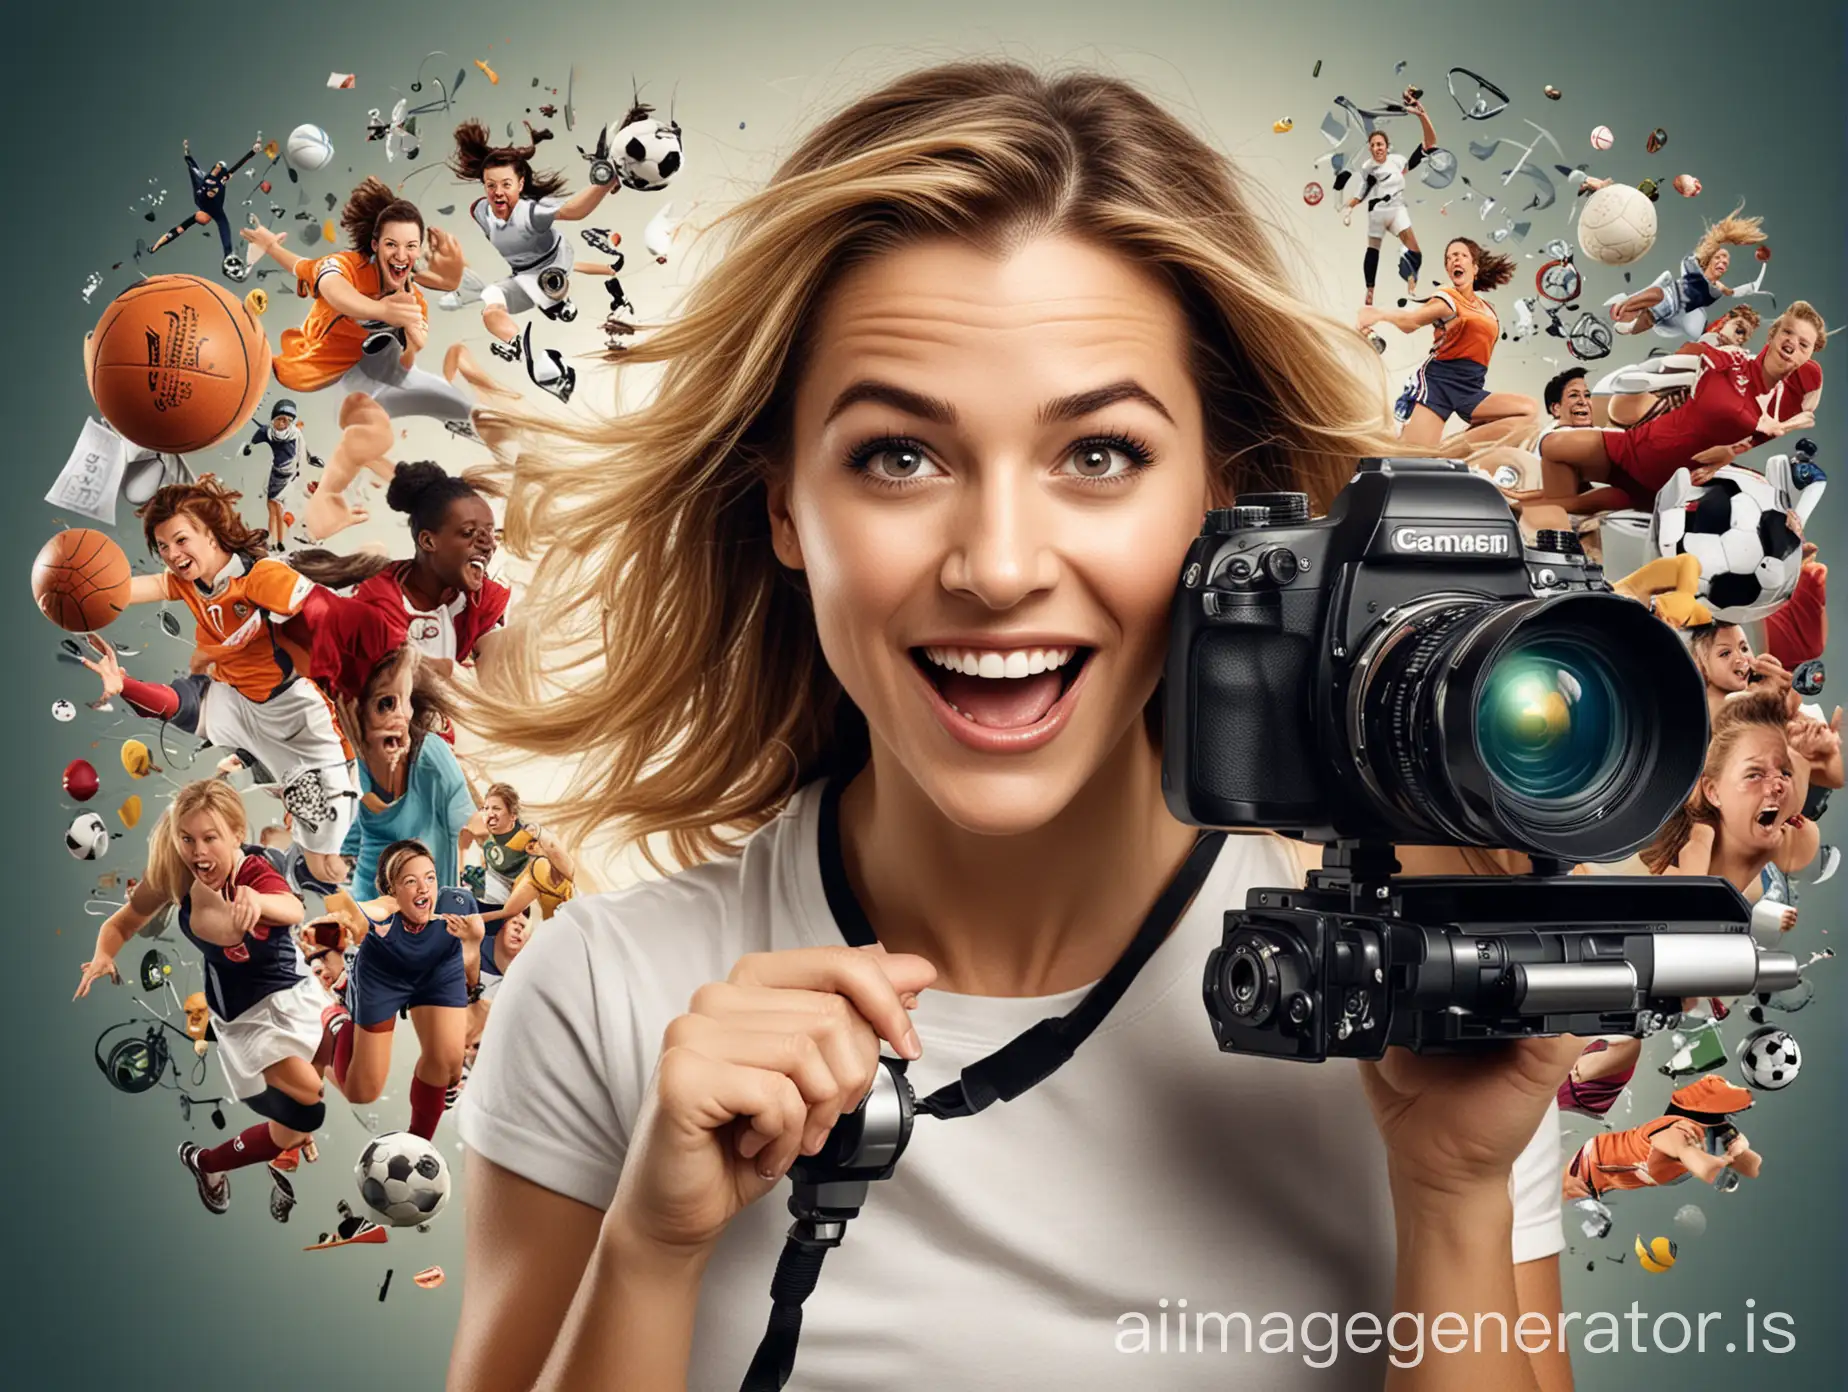 Create a combination of sports, laughter, cinema, science, knowledge, and camera symbols in an image to create an advertising banner. Use more female movie celebrities in this image.